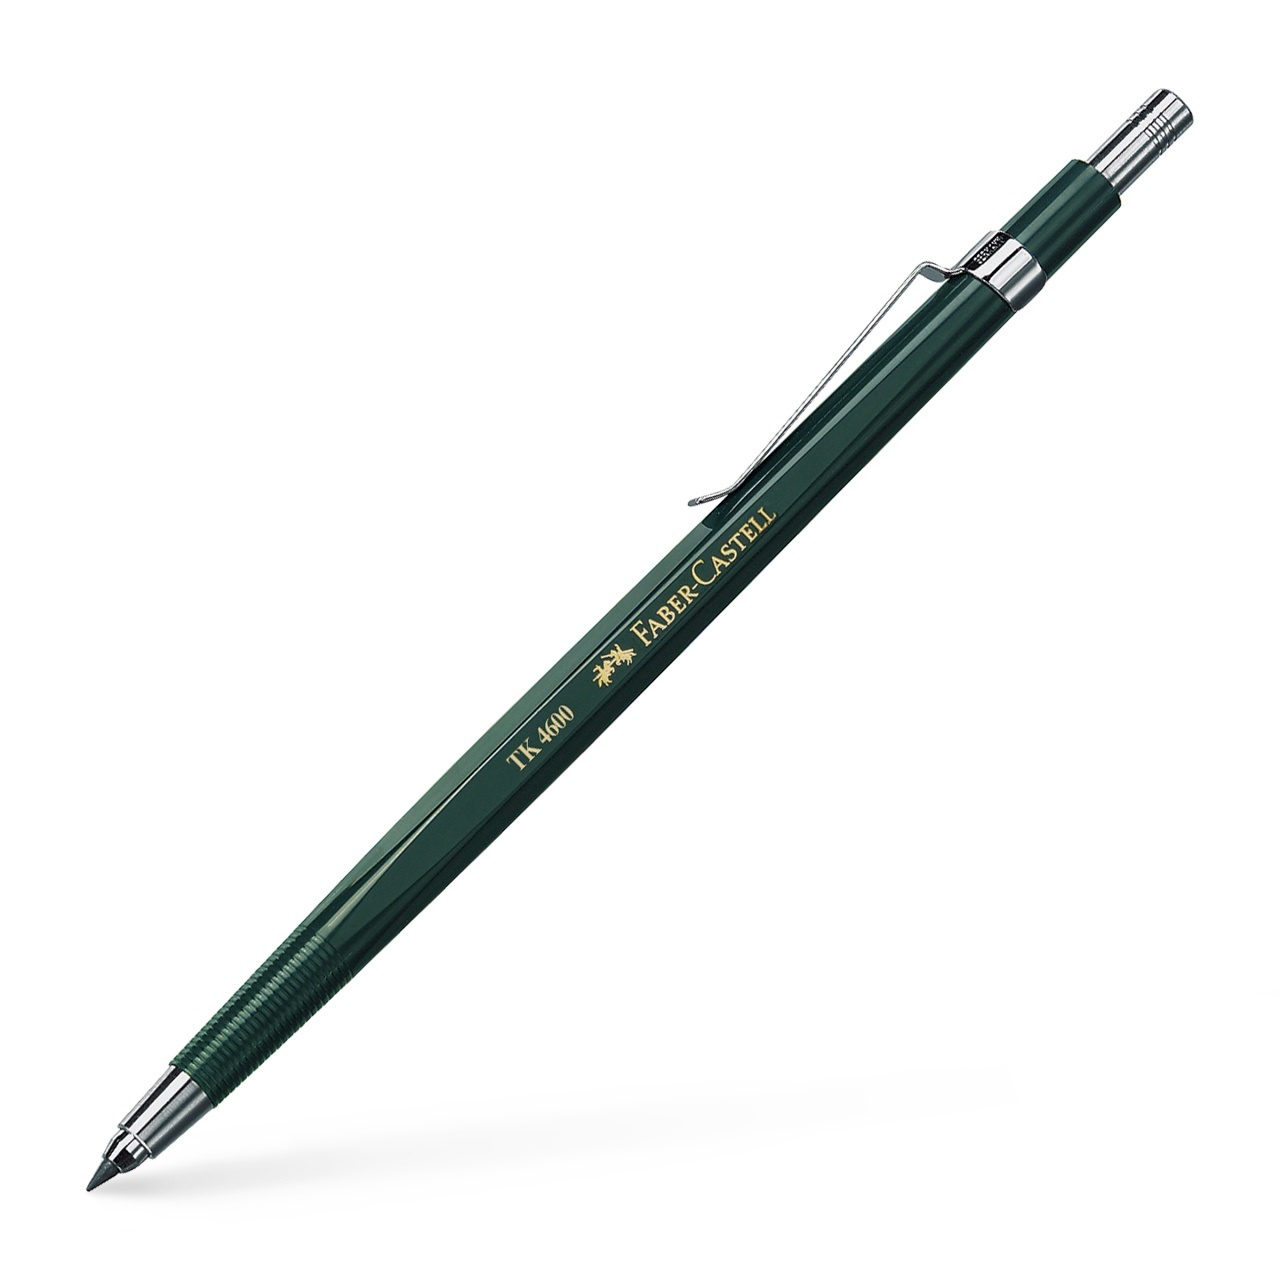 TK 4600 Lead holder 2 mm in the group Pens / Writing / Mechanical Pencils at Pen Store (105157)